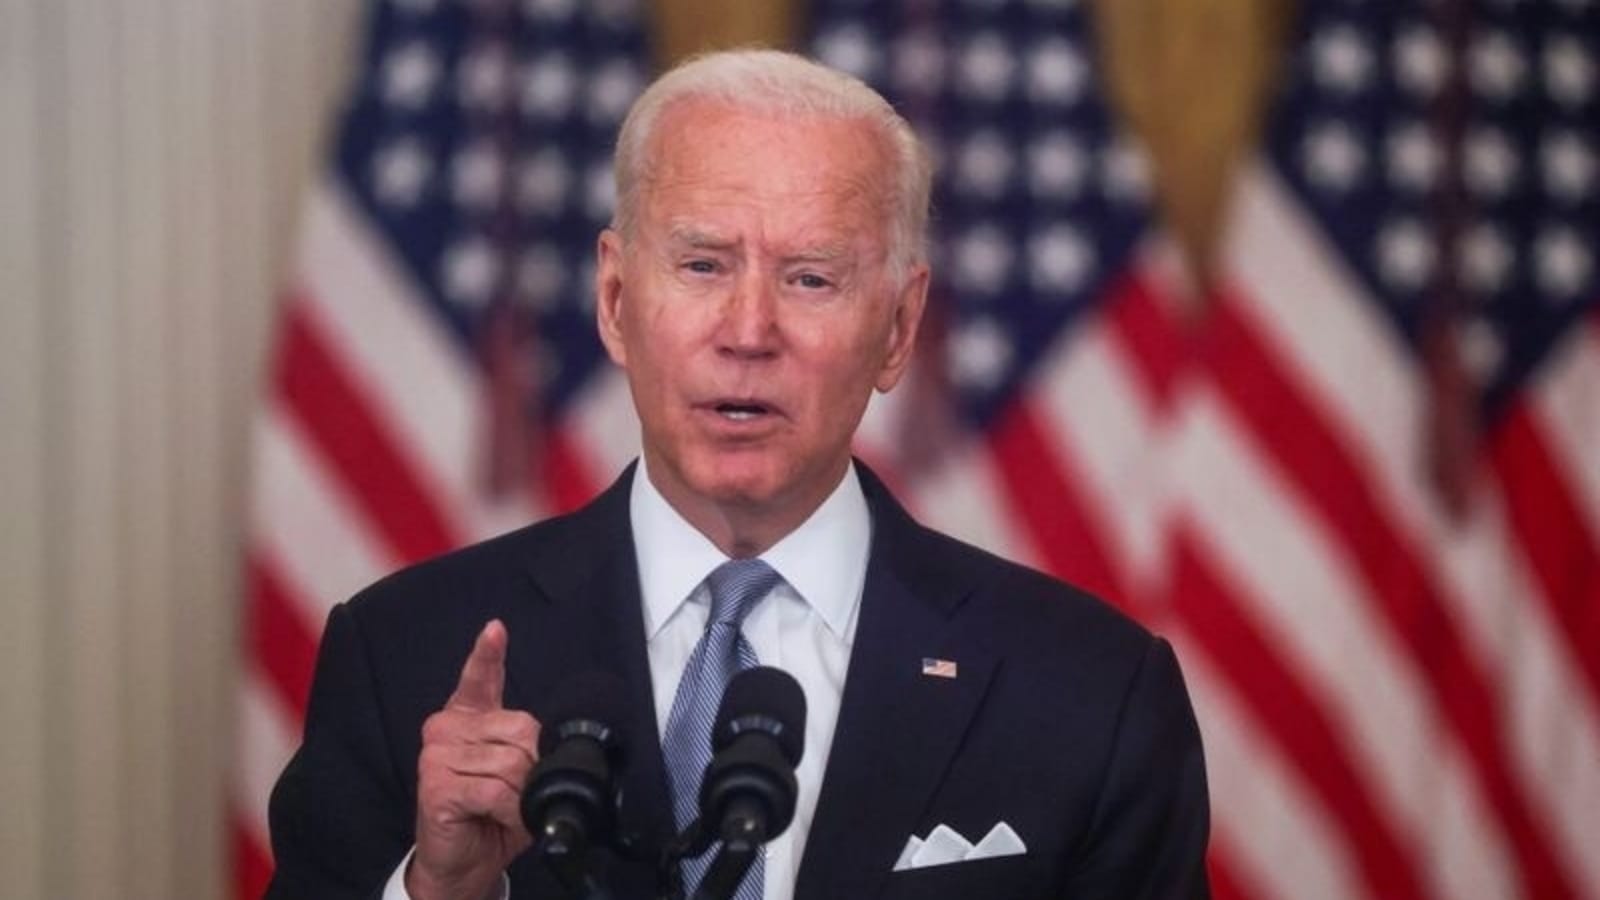 Afghanistan crisis: Biden to address amid mounting criticism | World ...